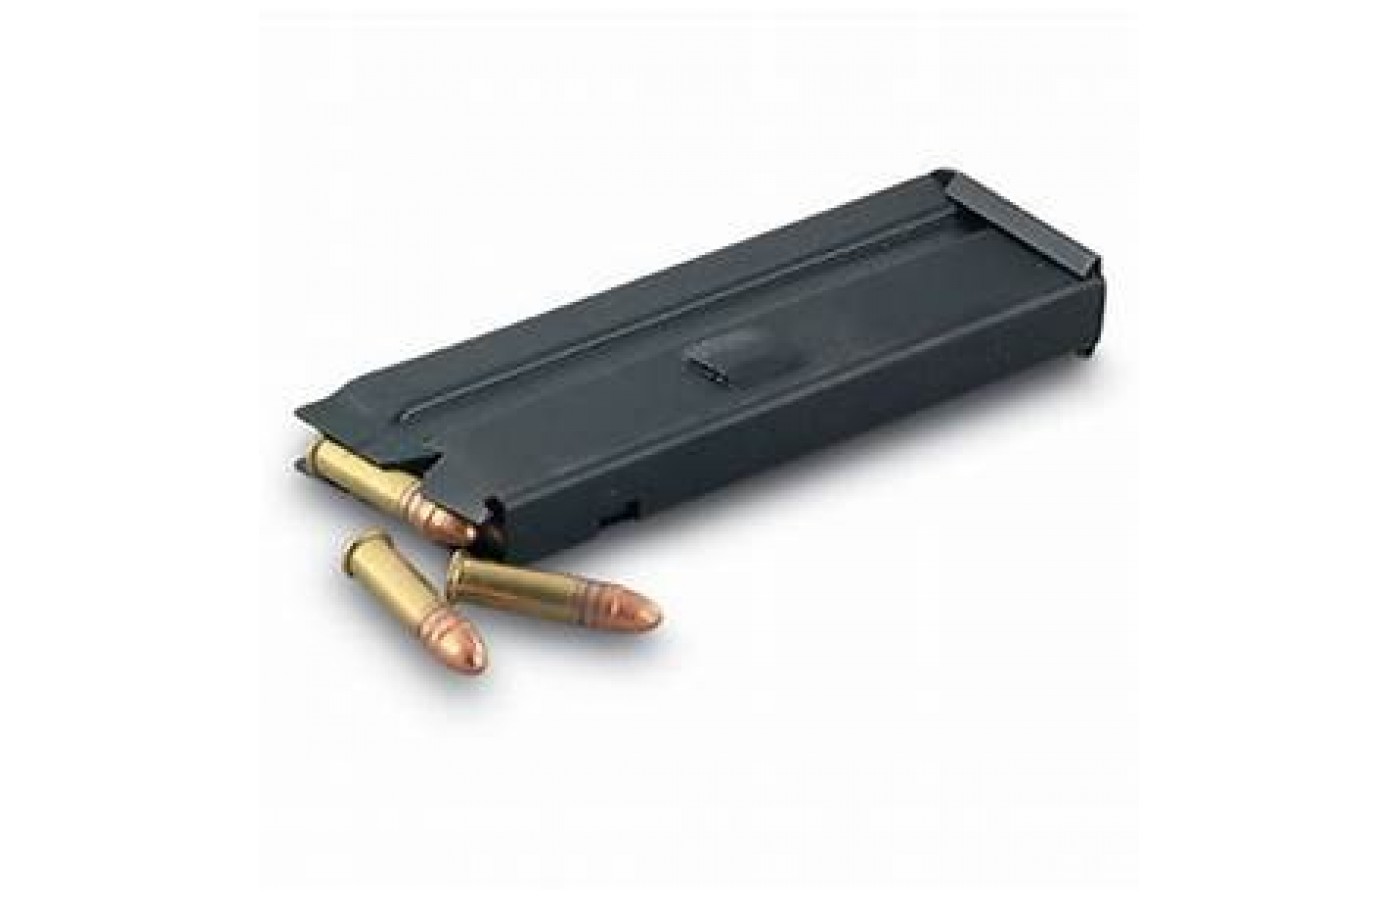 The eight-round magazines lack a floor plate that is removable.